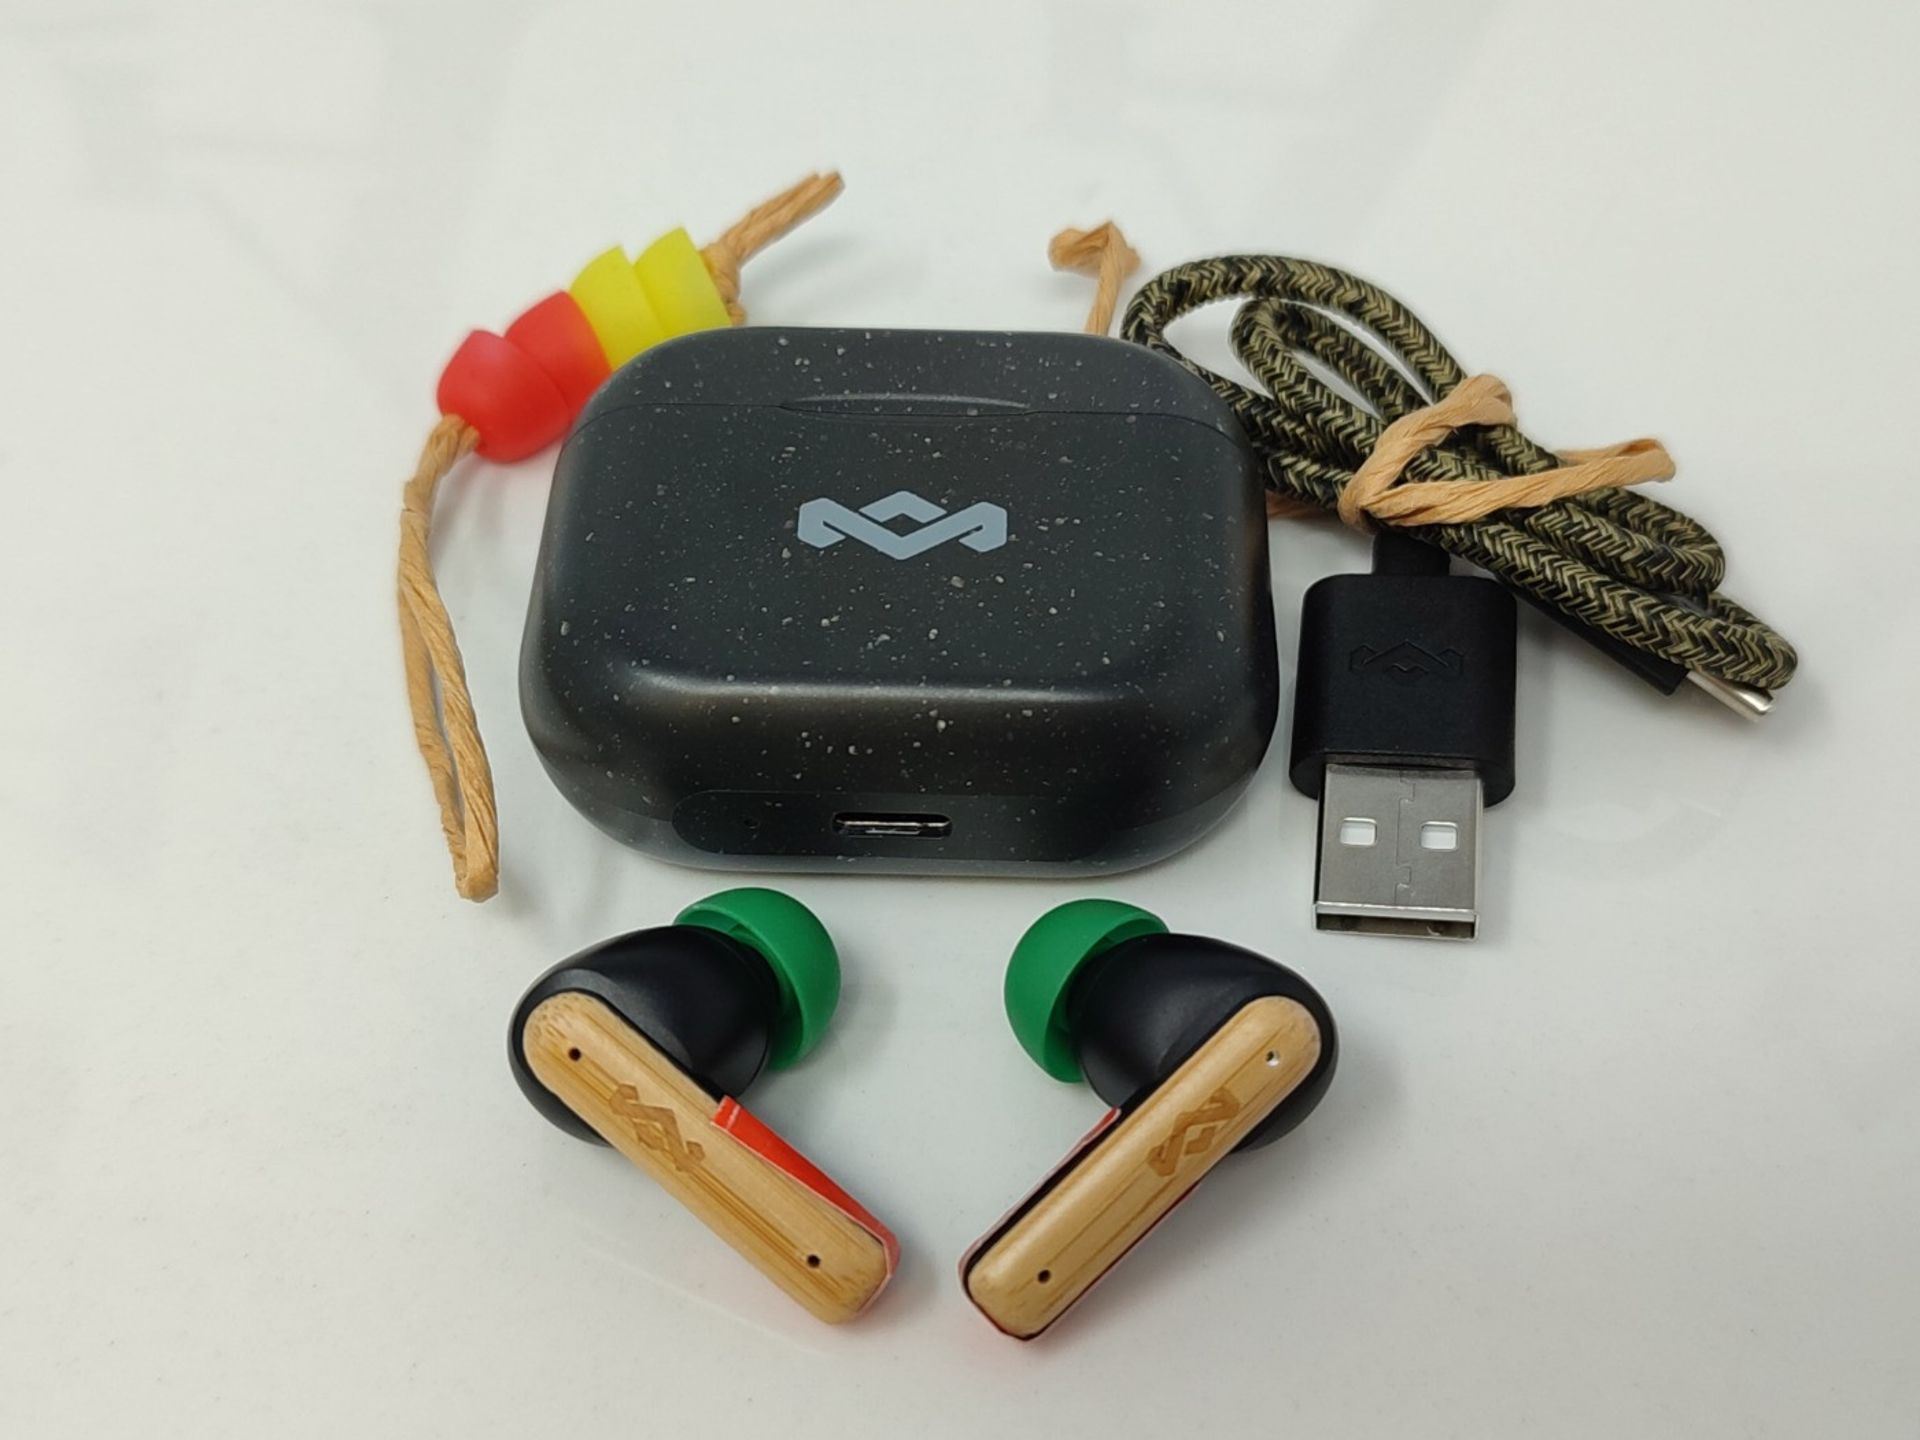 House of Marley Little Bird True Wireless Earbuds, Touch Controls, Built-in Microphone - Image 6 of 6